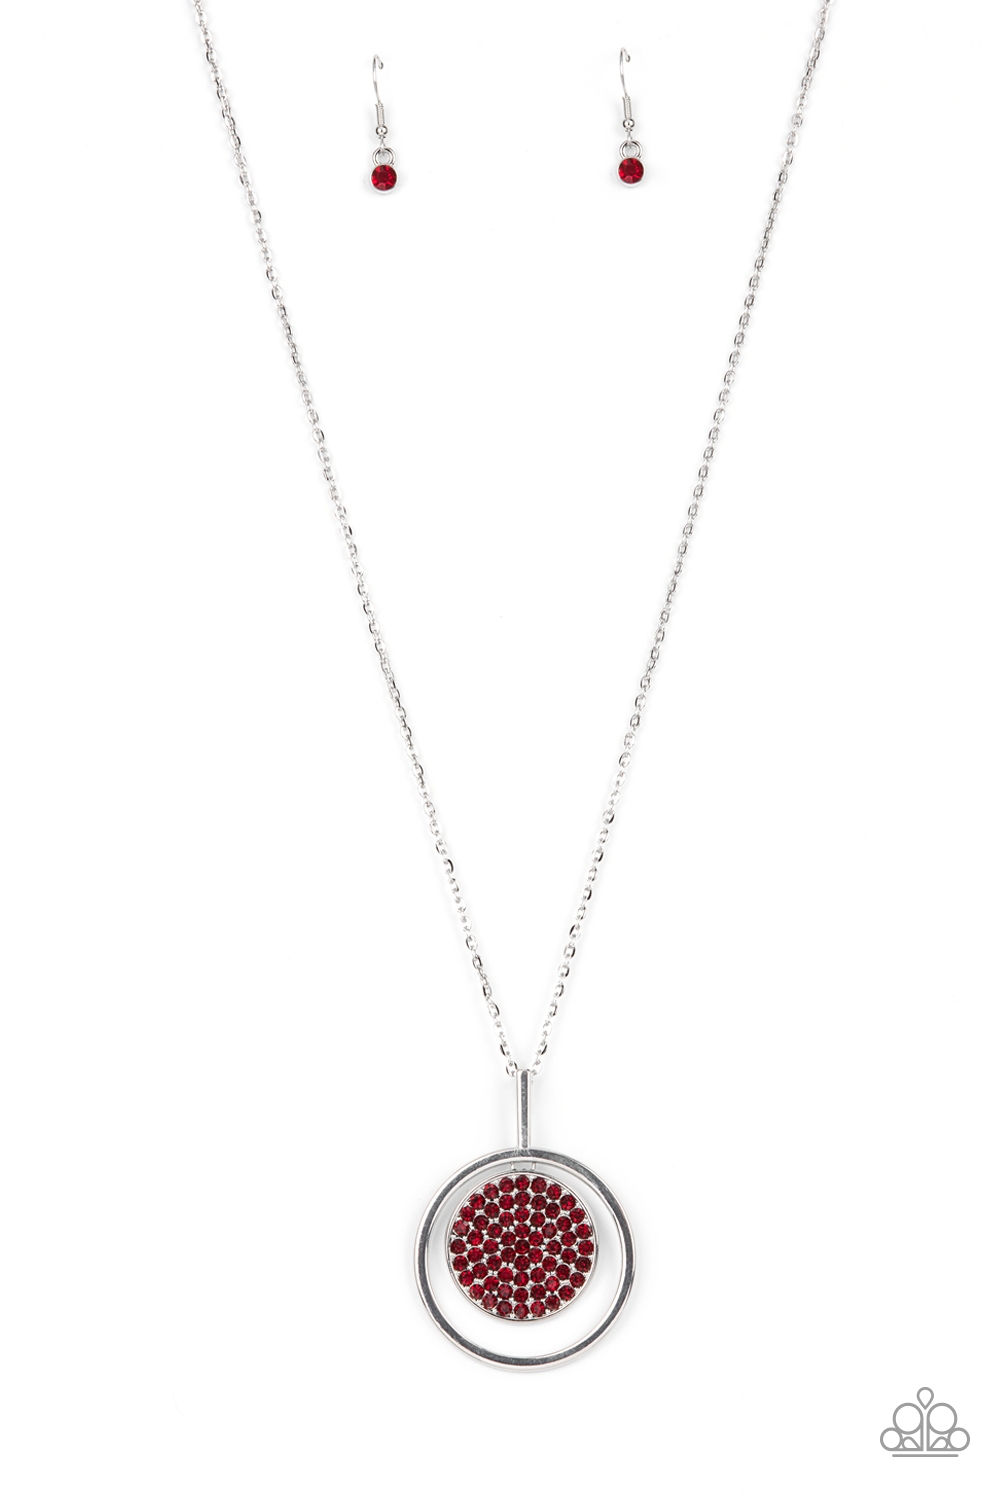 Necklace - There She GLOWS! - Red